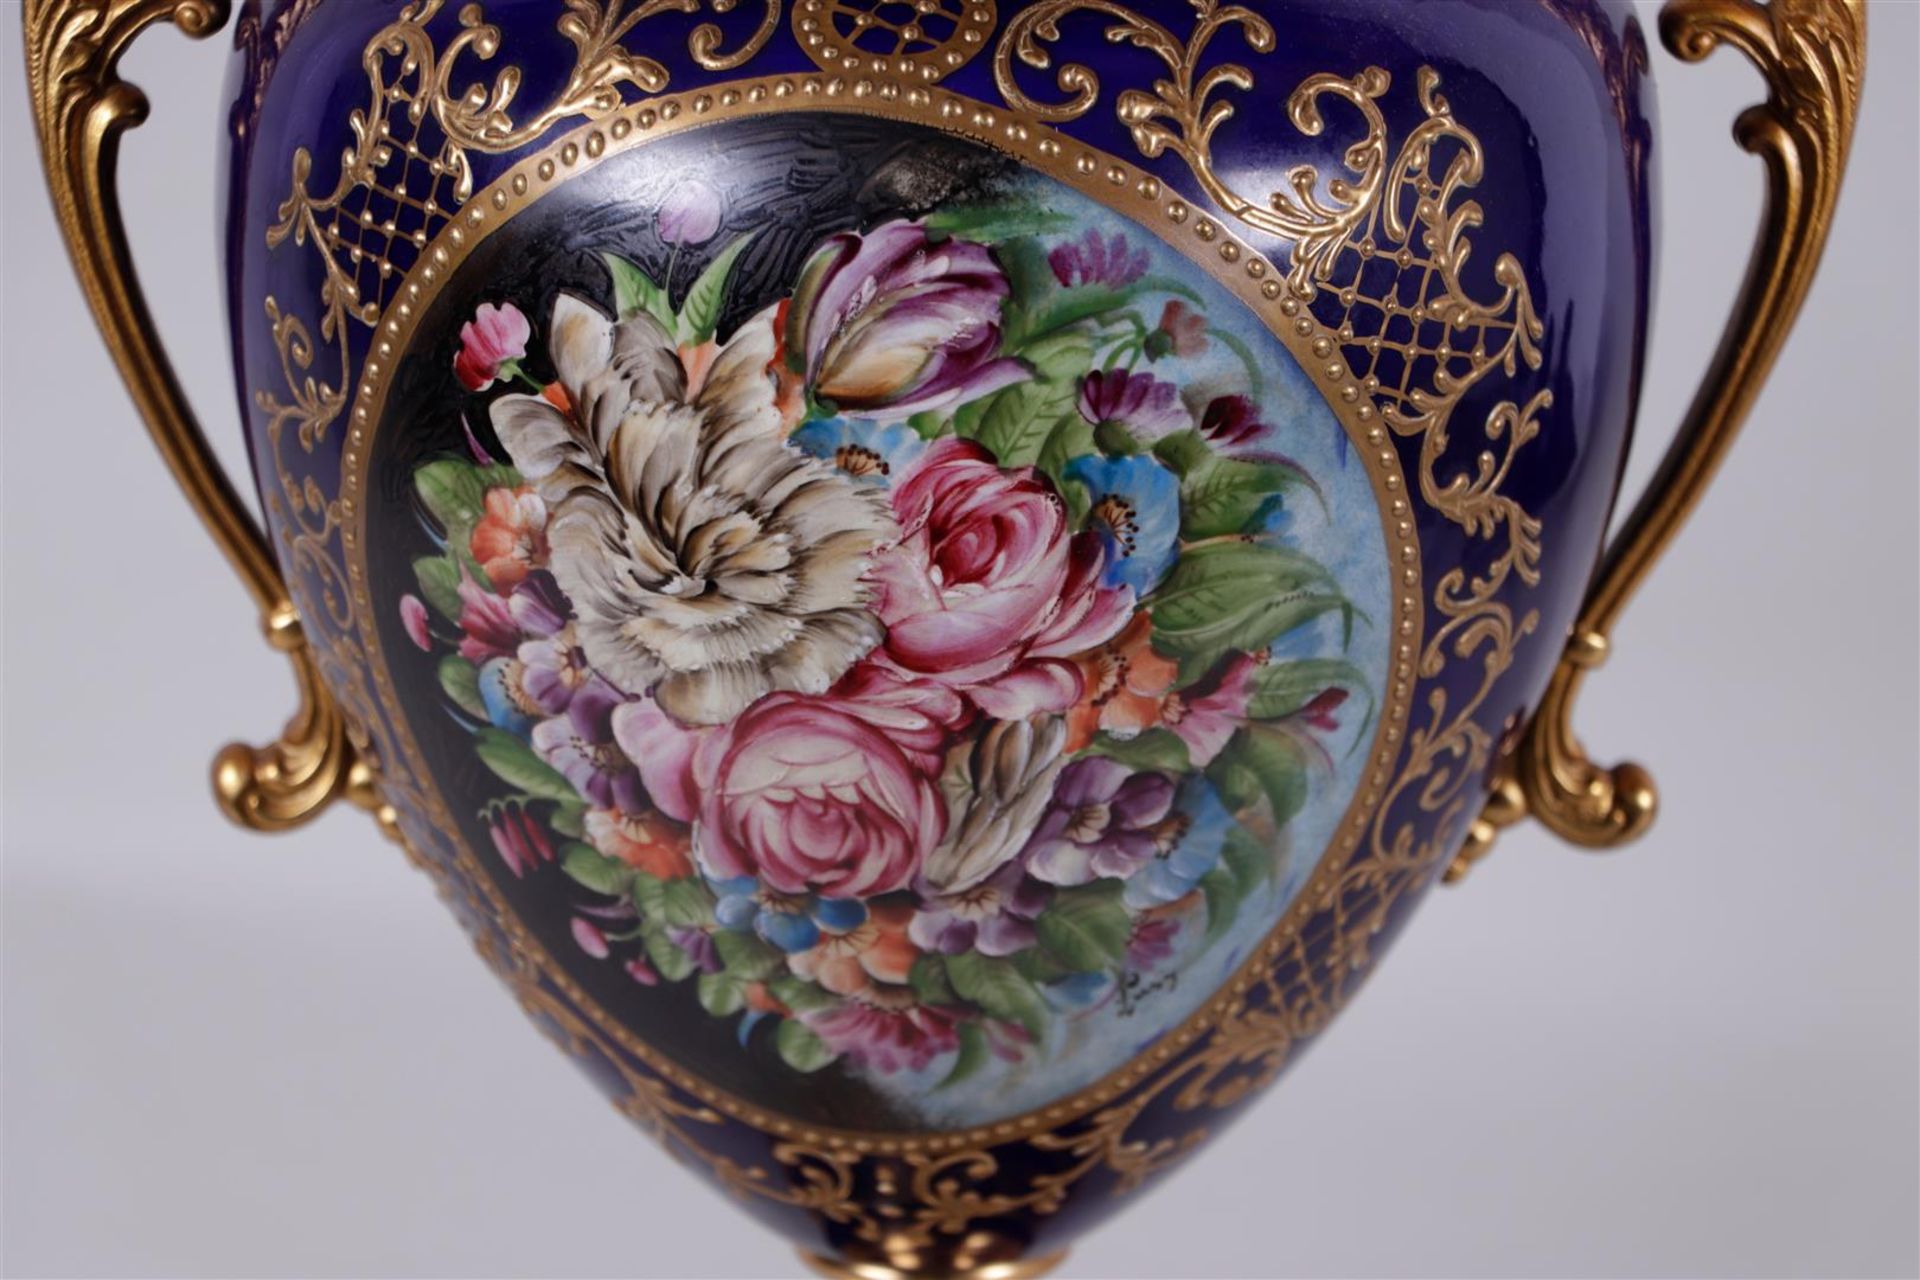 A Sevres-style lidded vase with brass frame.
H. 62 cm. - Image 2 of 3